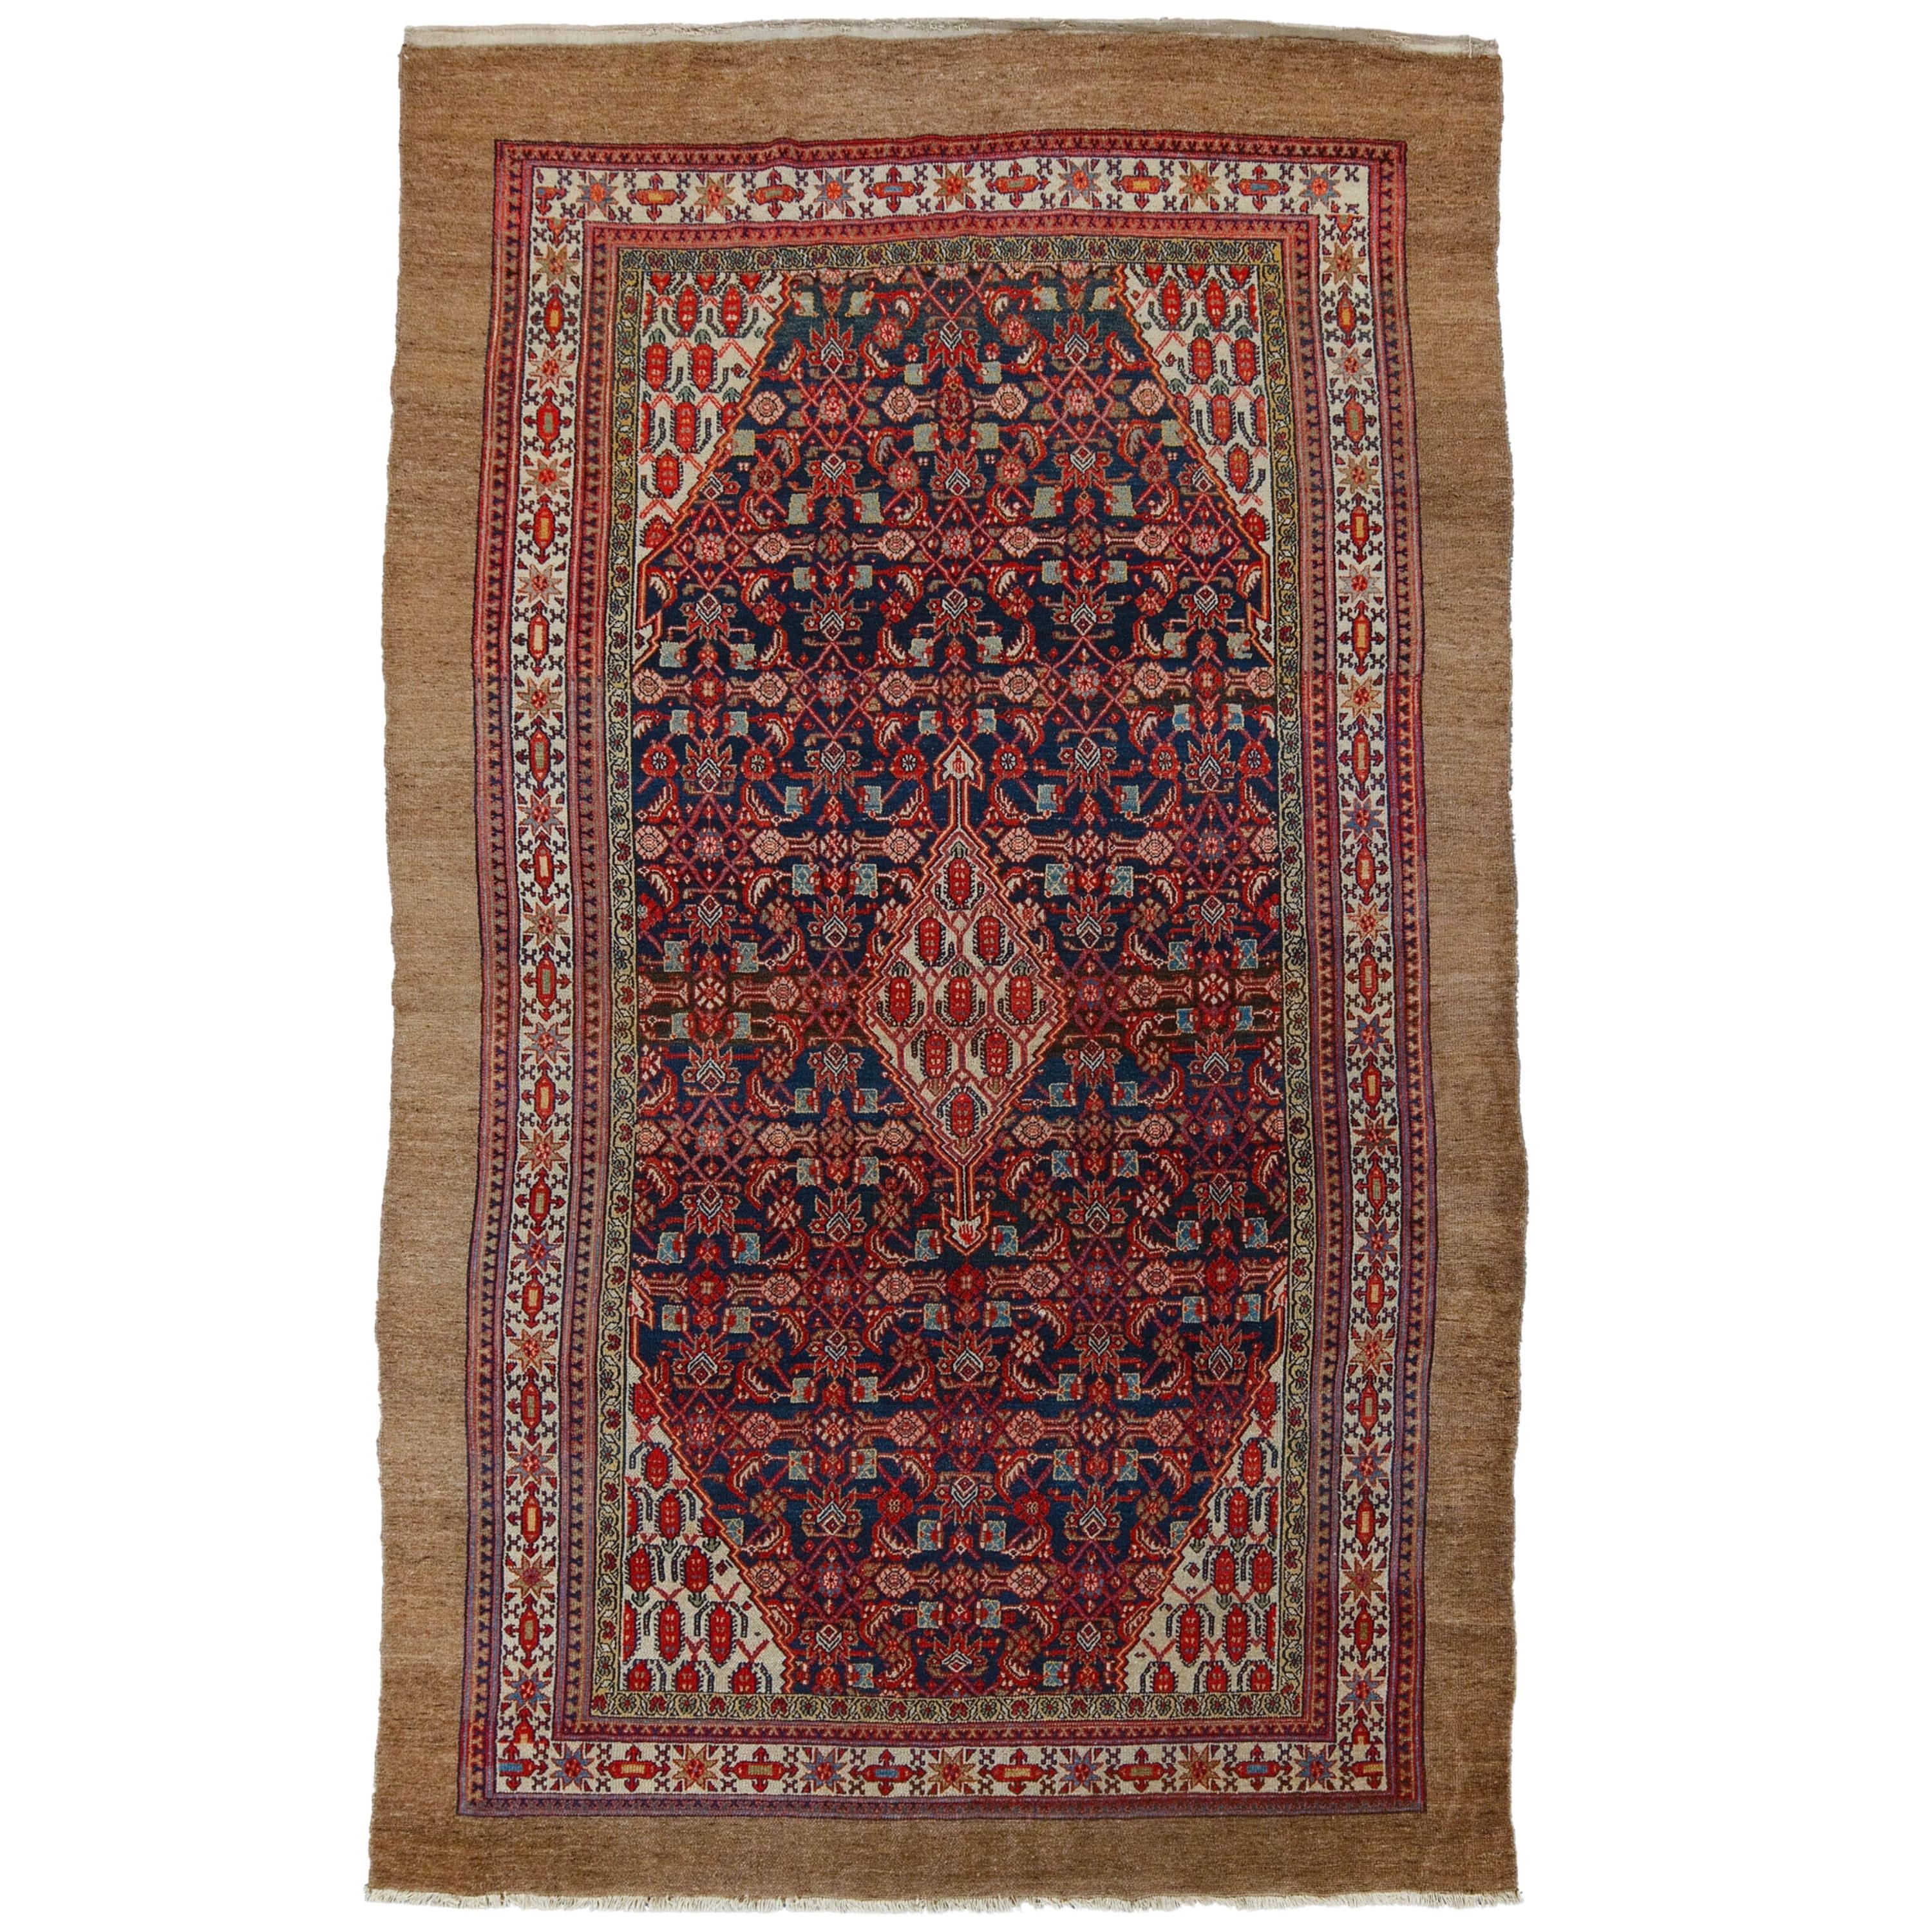 Antique Hamadan Rug - Late of 19th Century in Good Condition, Antique Rug For Sale